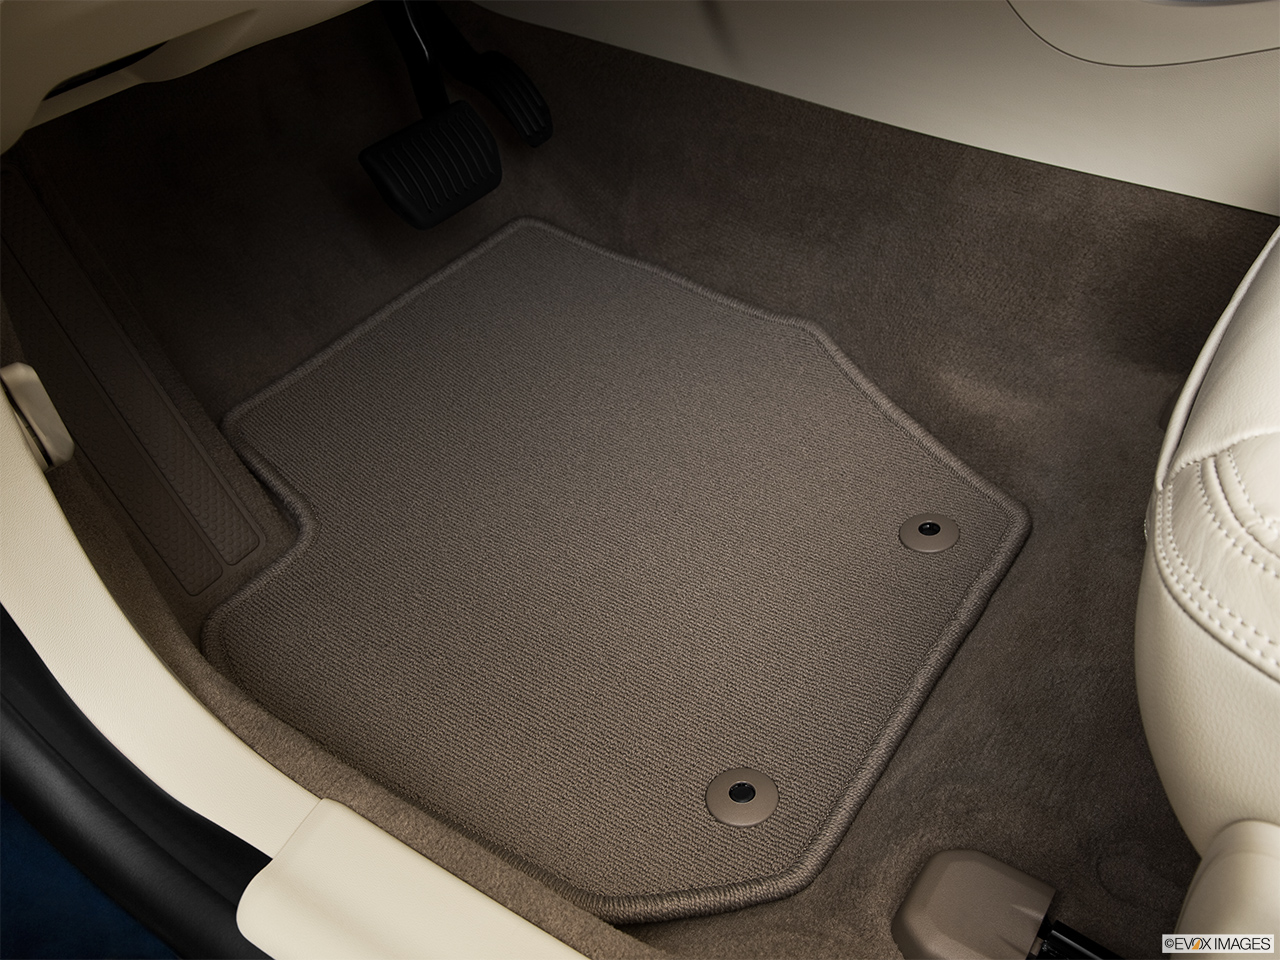 2013 Volvo S60 T5 FWD Premier Driver's floor mat and pedals. Mid-seat level from outside looking in. 